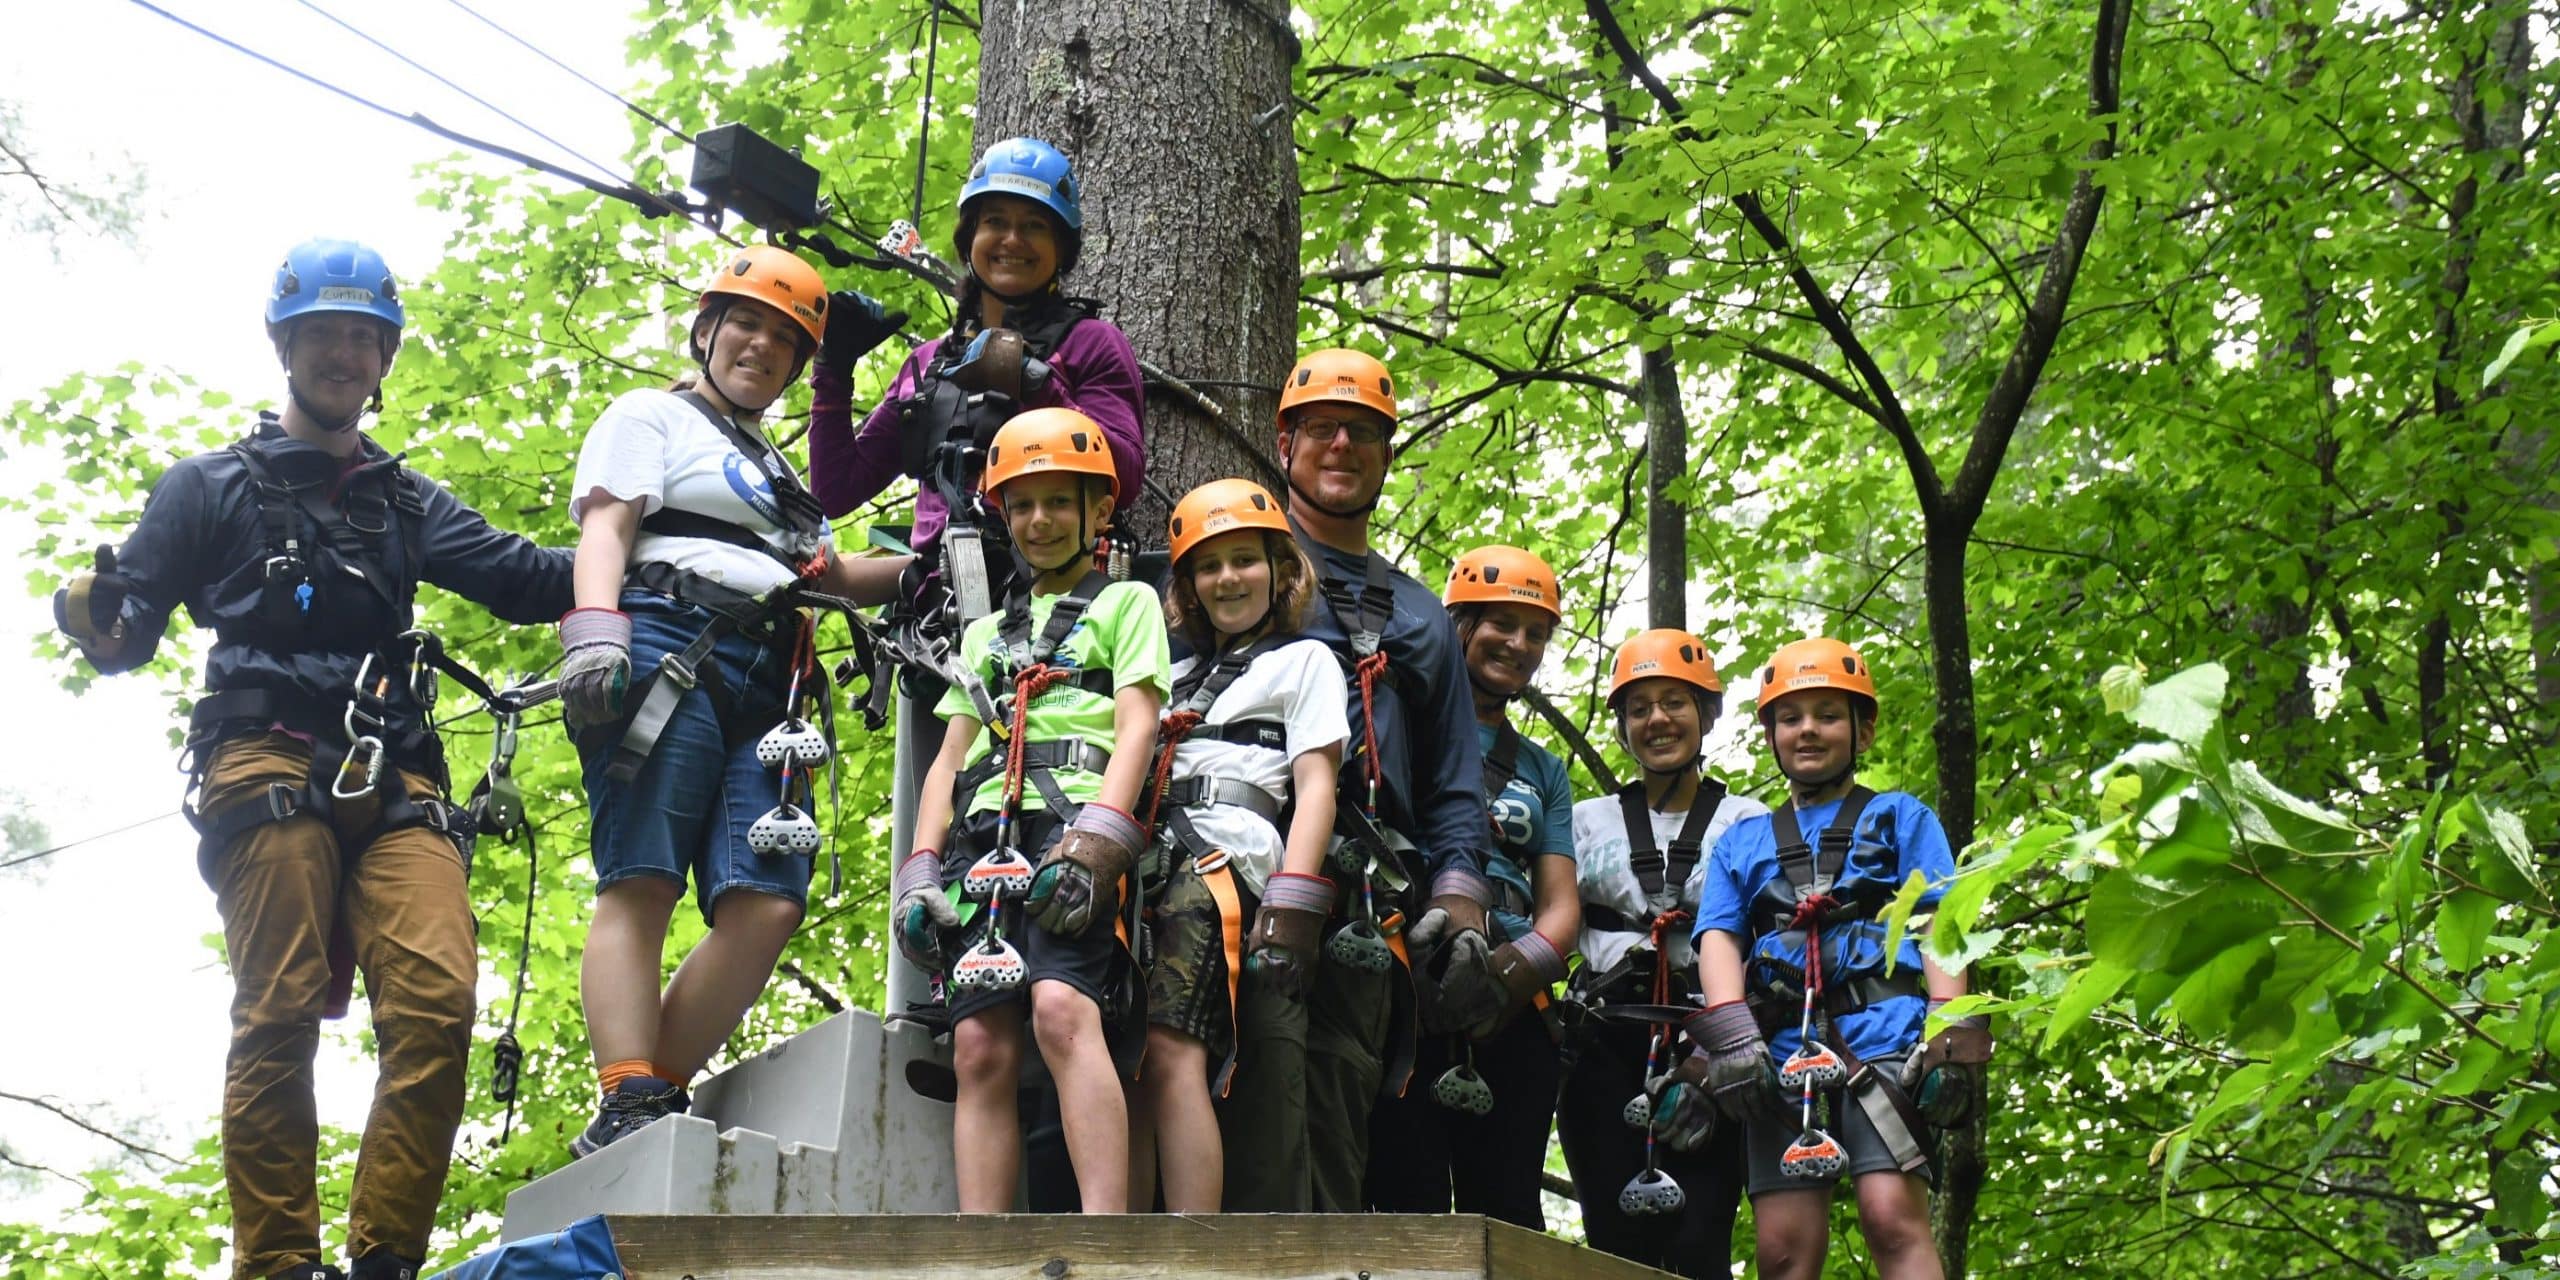 Guides and young zipliners on the Zoar Outdoor Zipline Canopy tour